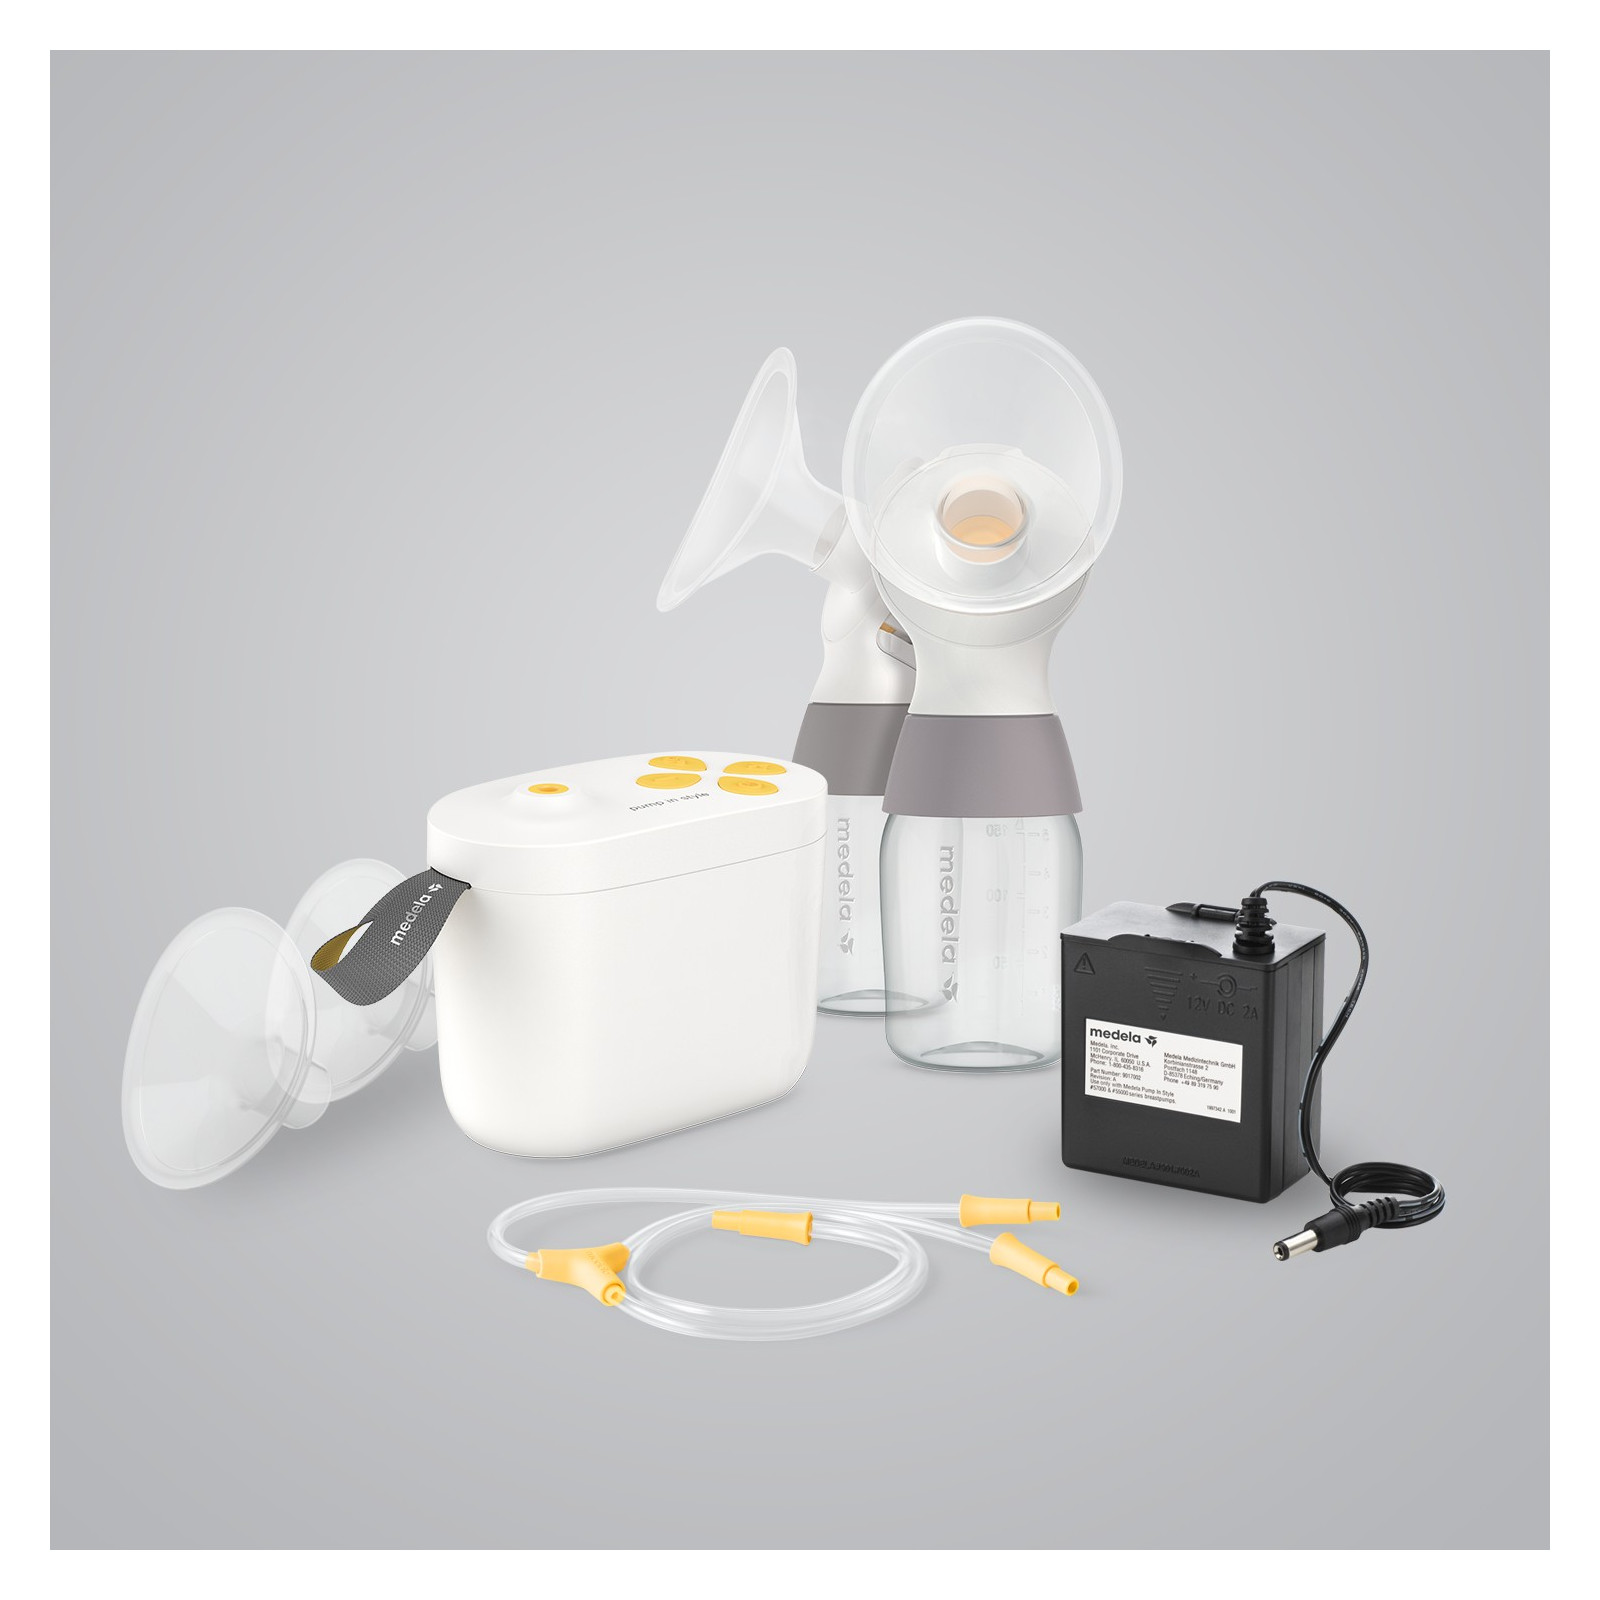 Medela Pump in style advanced double breastpump electric